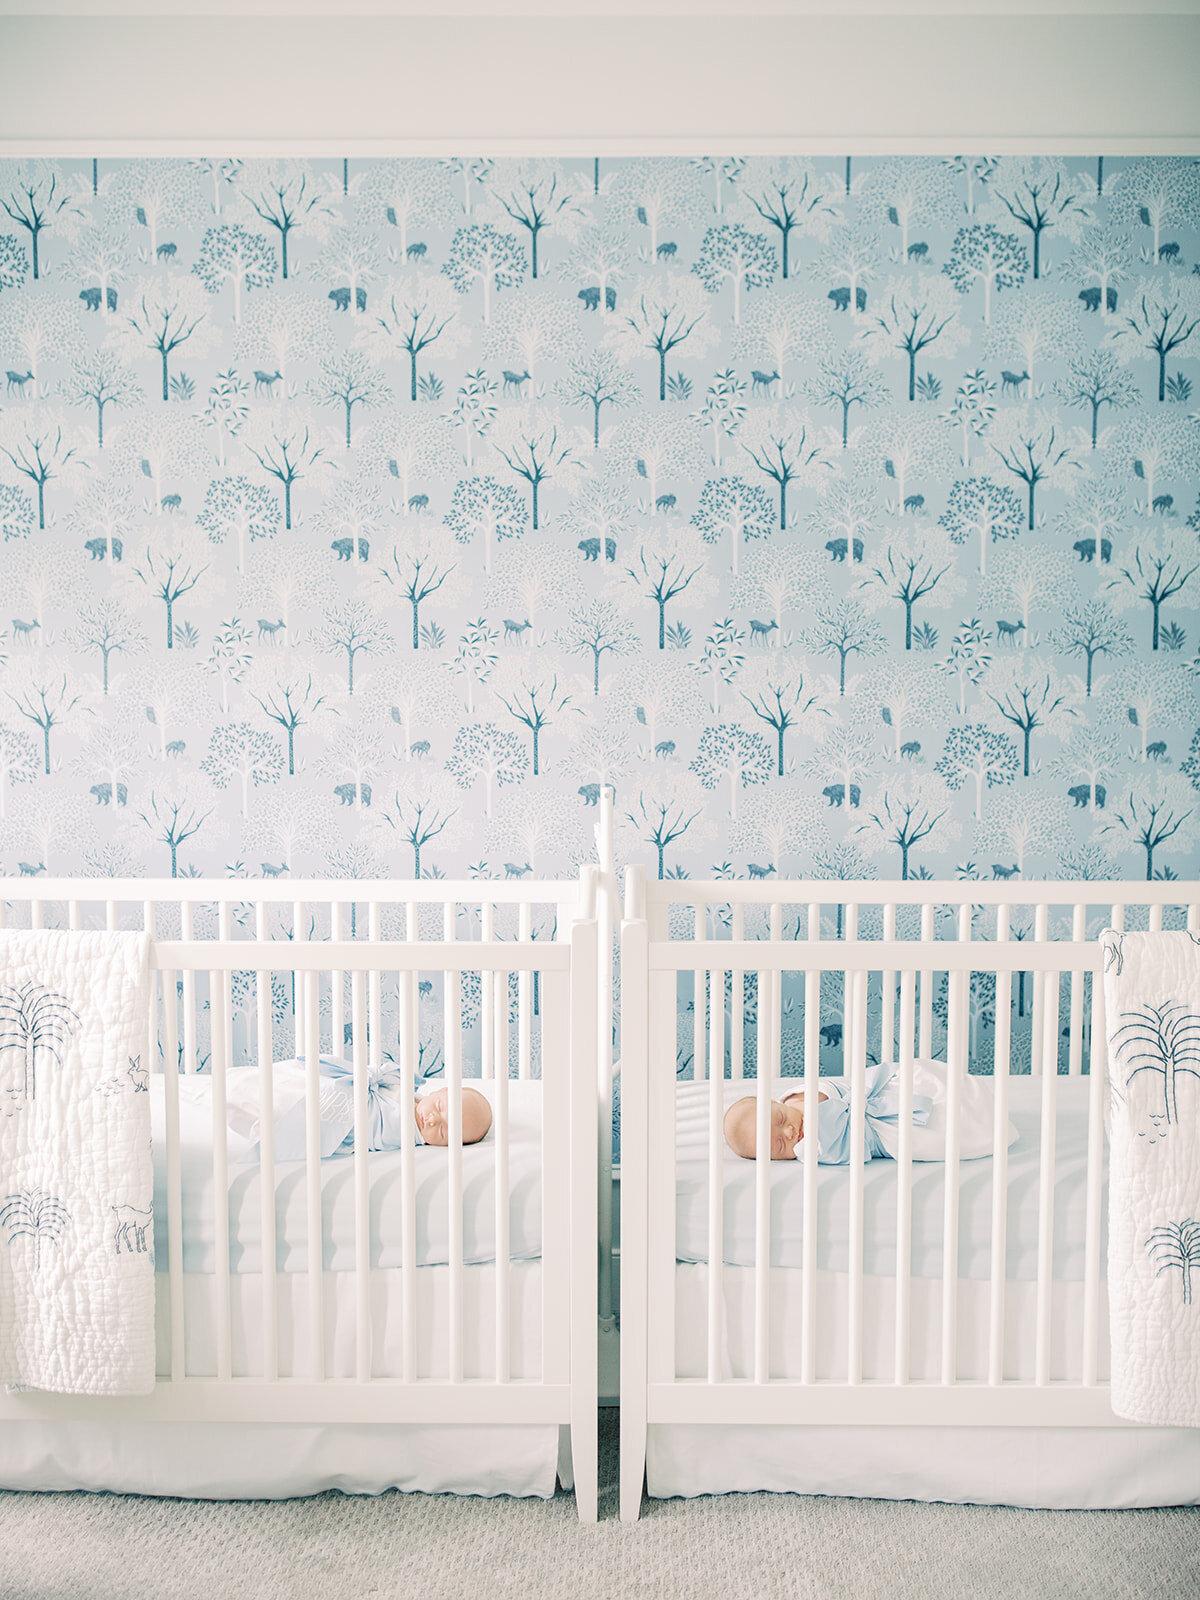 Twin baby boys sleep in their white cribs in their nursery with blue Serena & Lilly wallpaper.